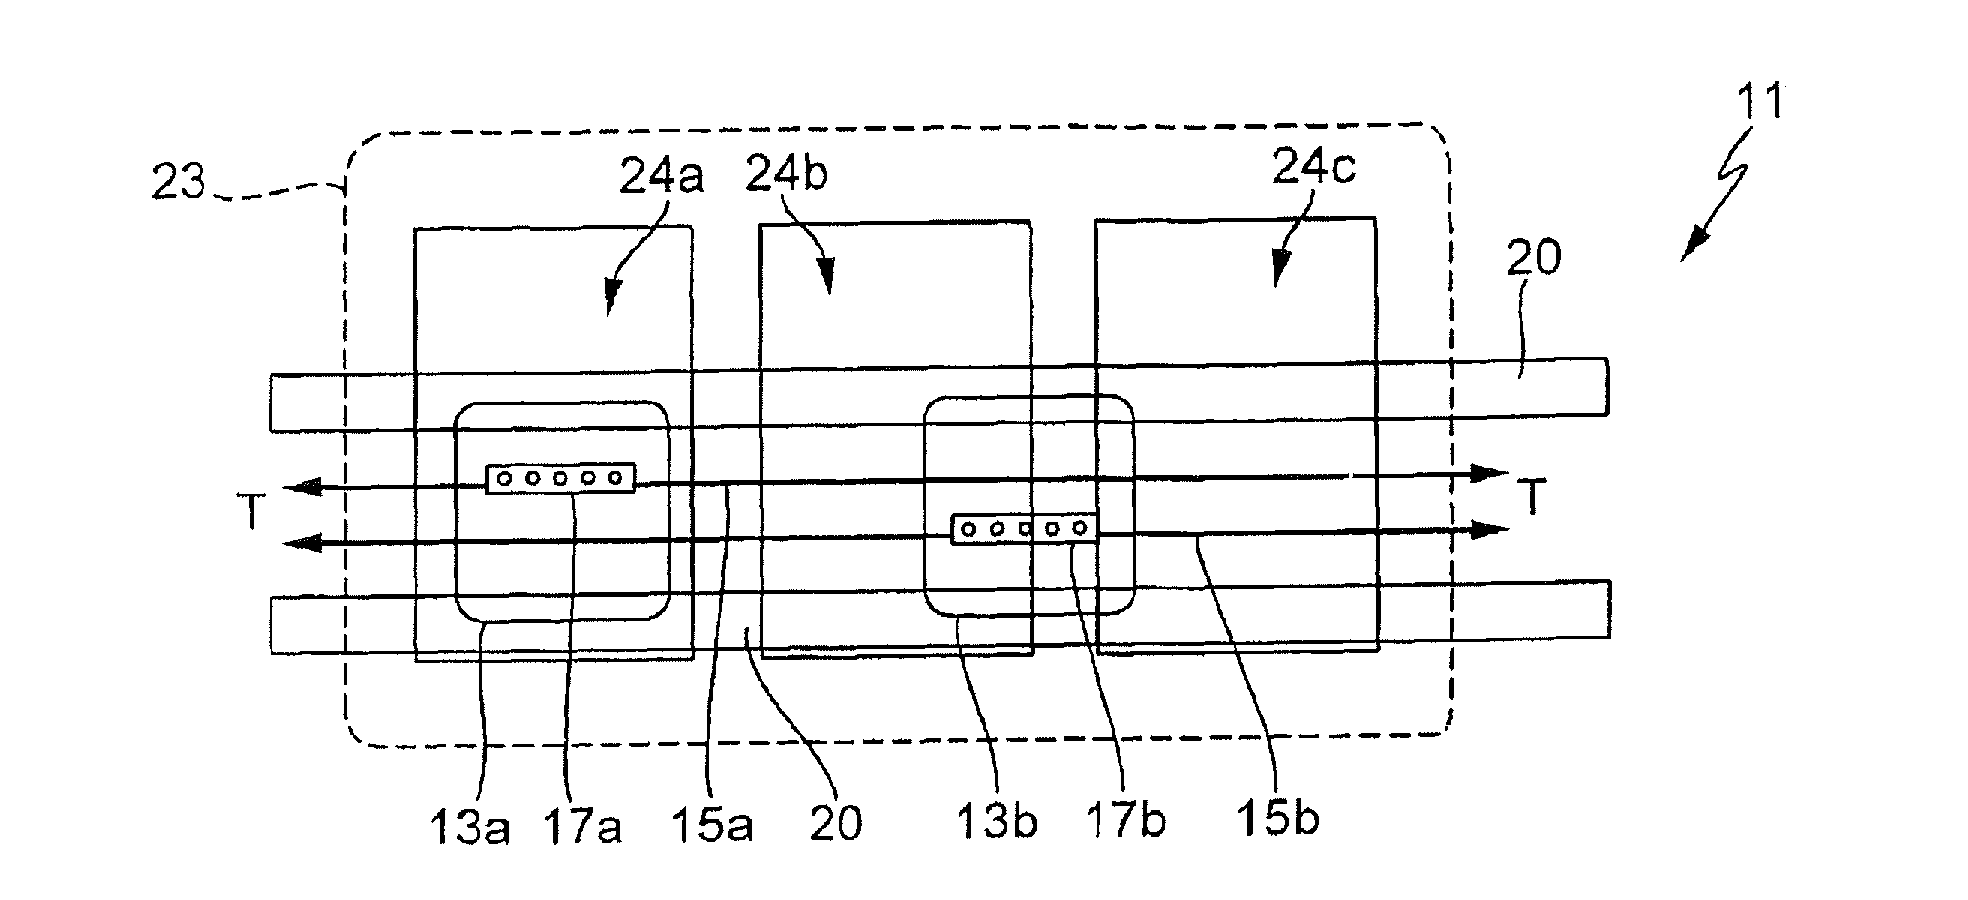 Apparatus and Method for Transporting Substrates